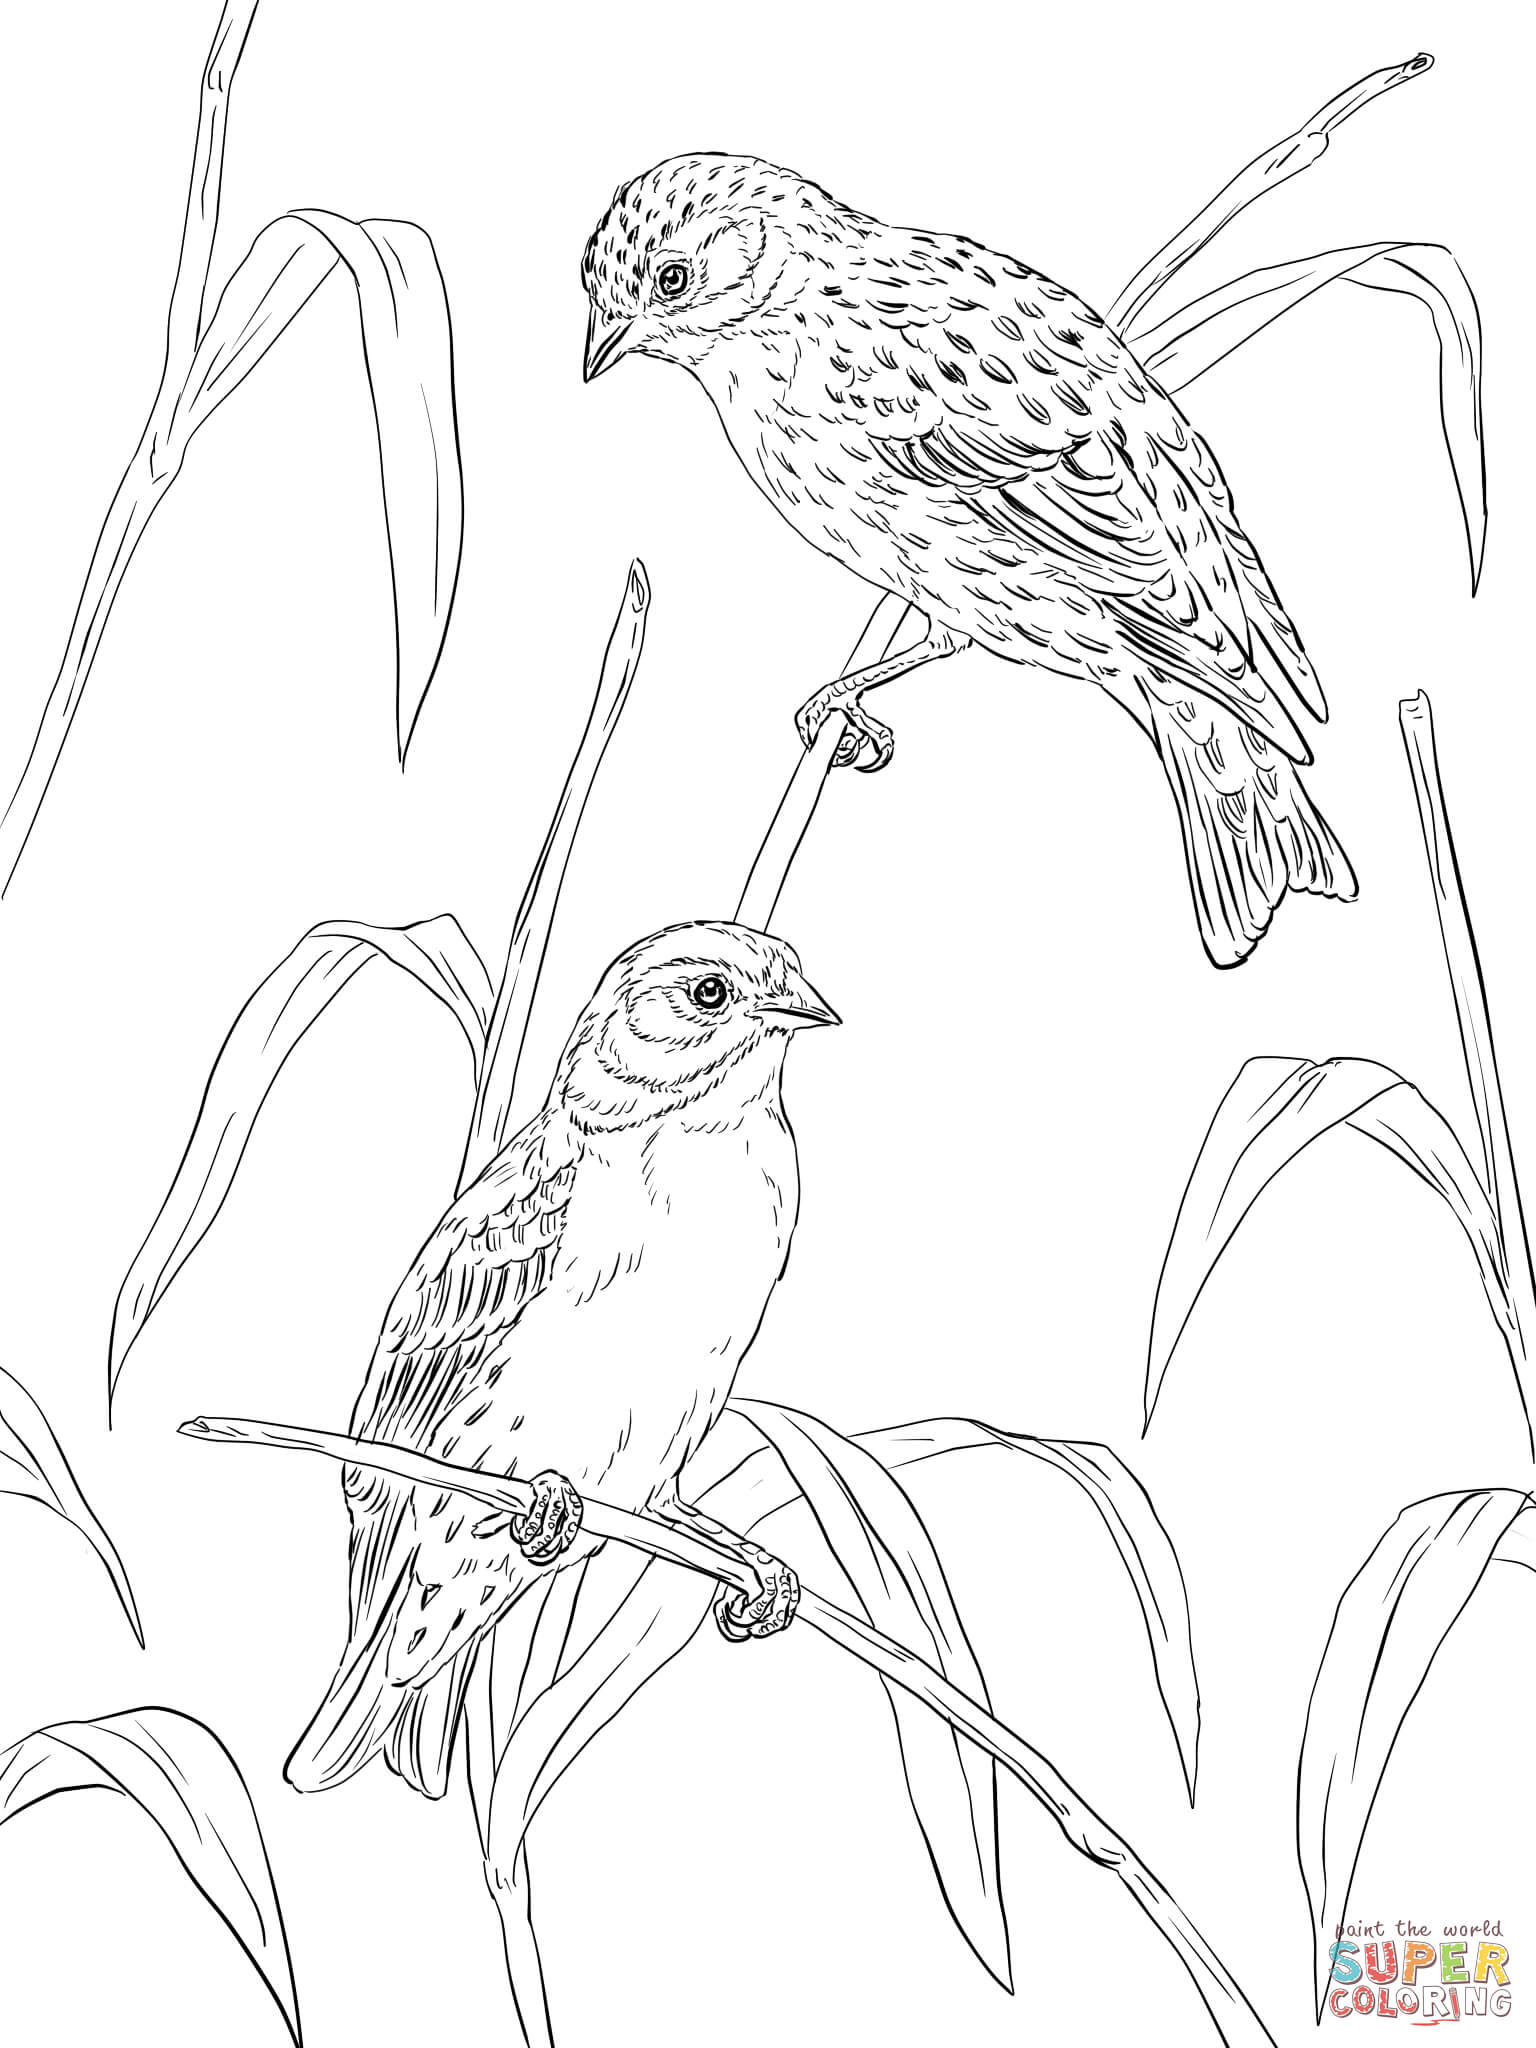 Atlantic canaries coloring page | Free Printable Coloring Pages